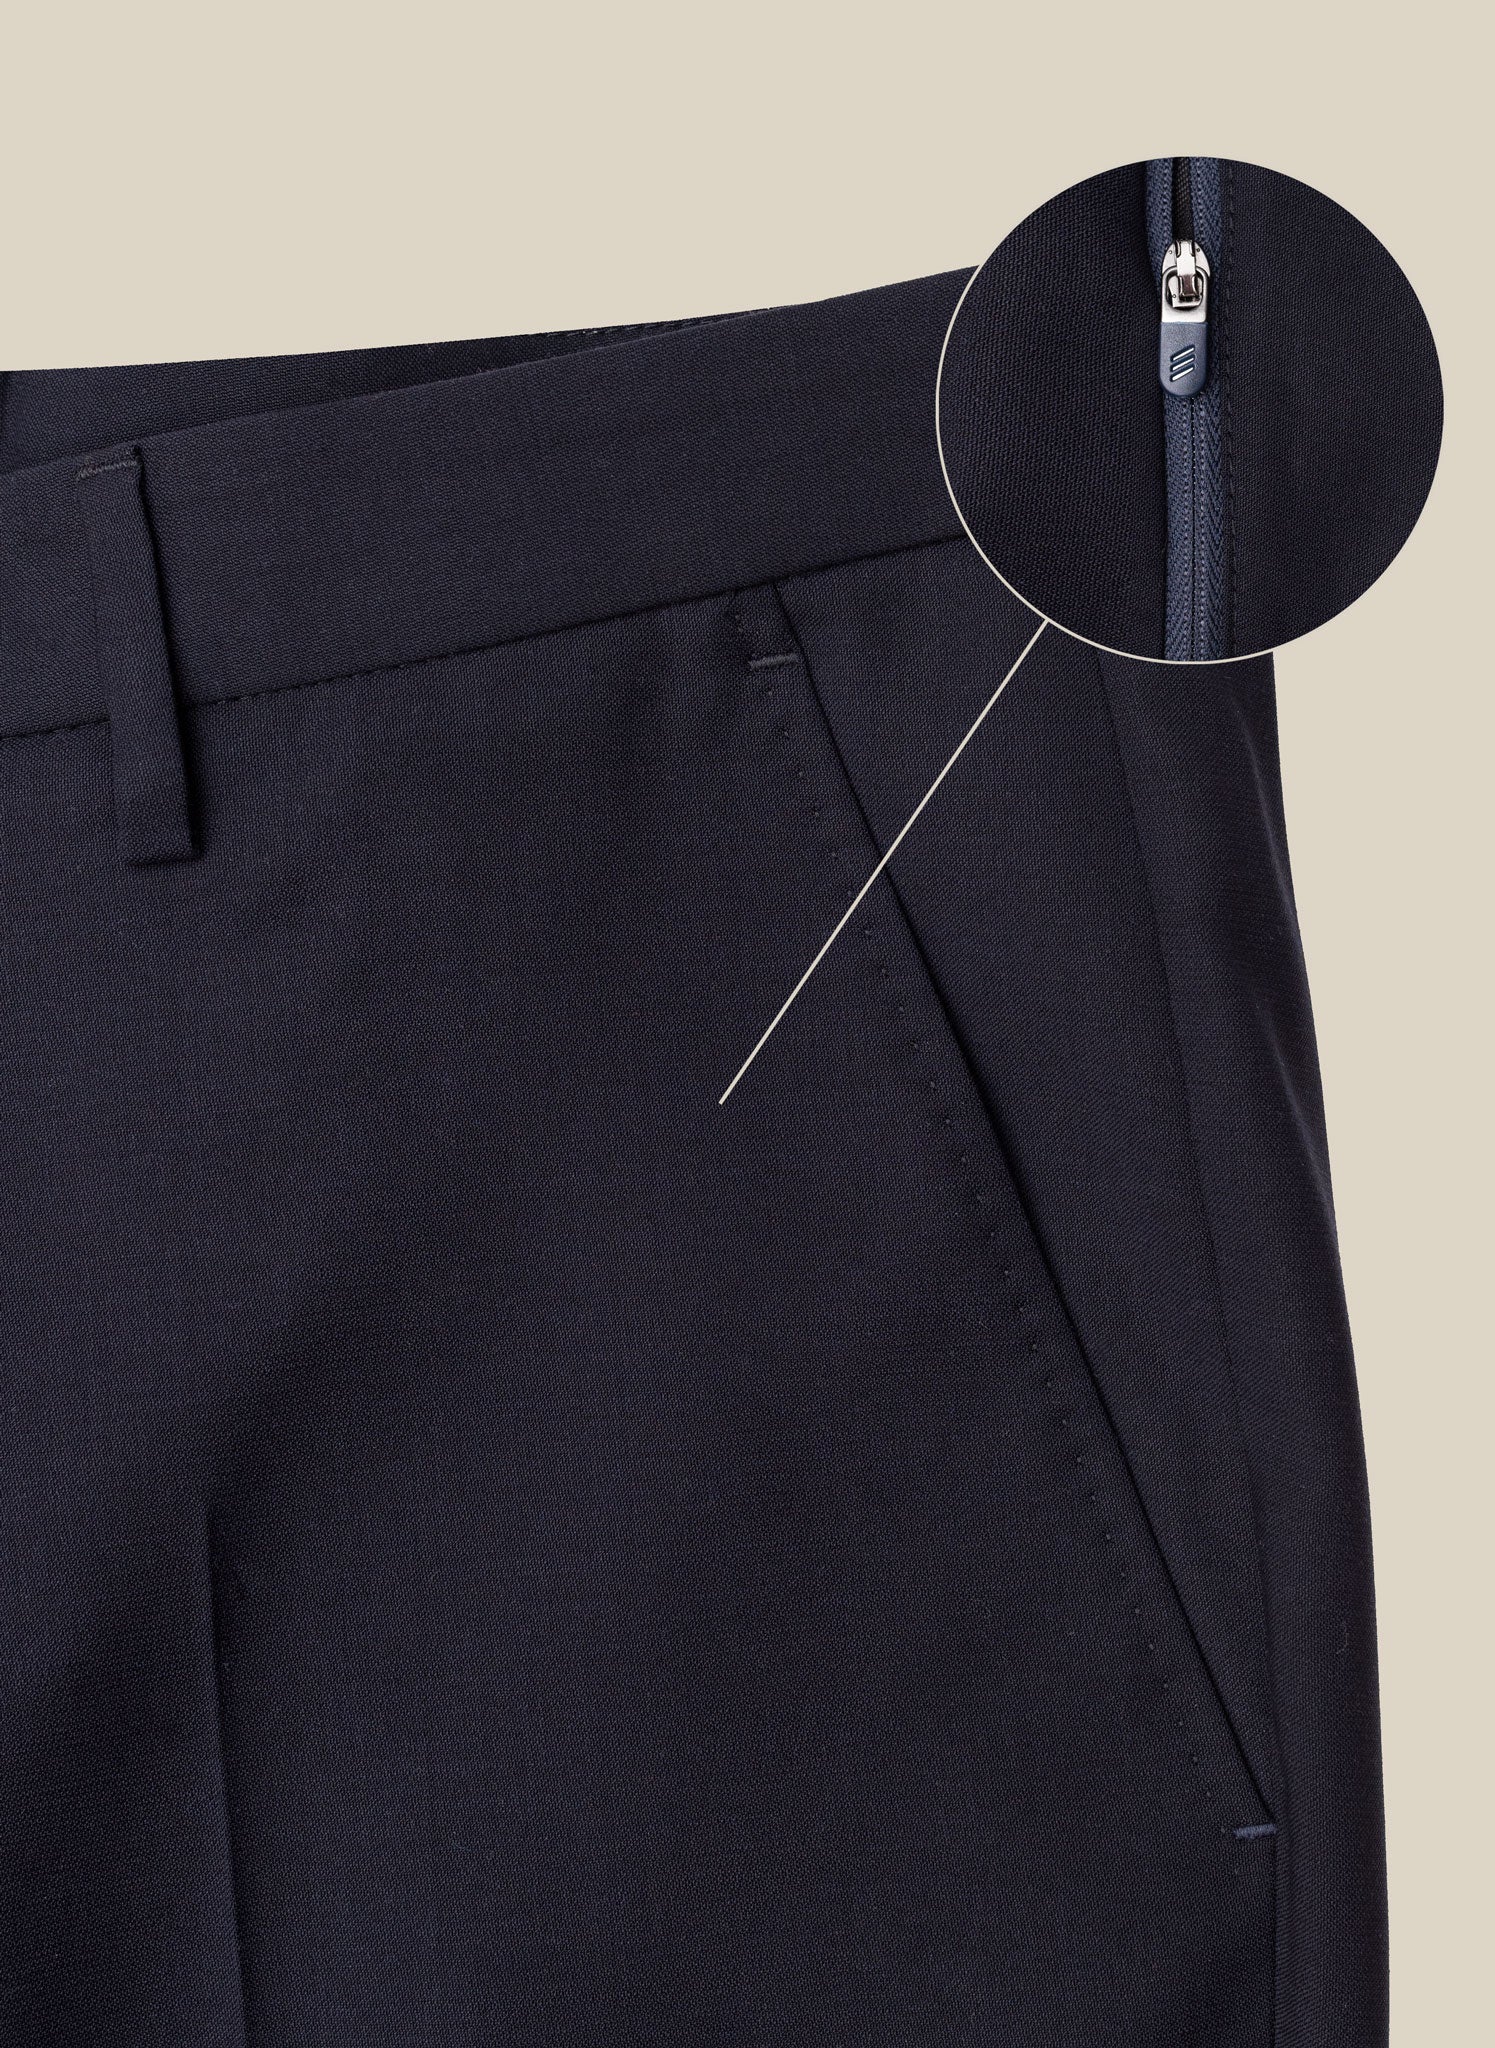 Travel-friendly and professional mens trousers